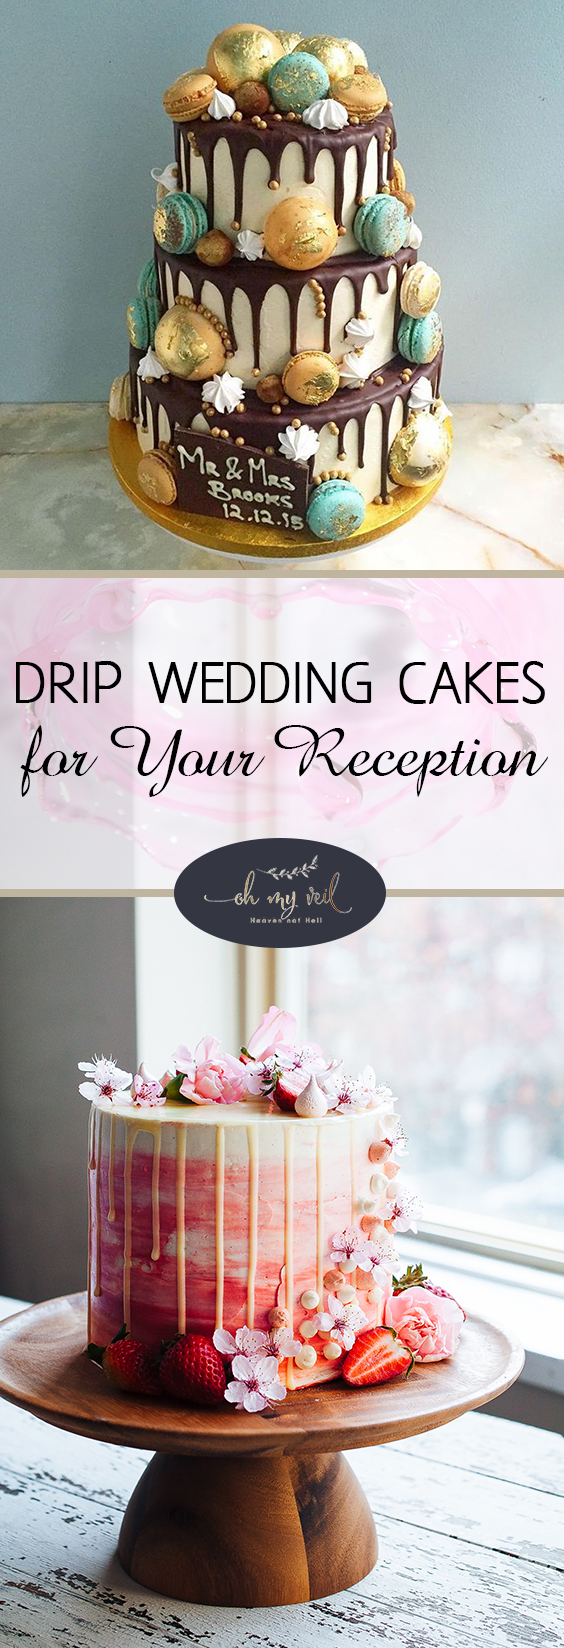 Drip Wedding Cakes for Your Reception| Wedding Cakes Simple, Simple Wedding Cakes, Wedding Reception Ideas, Wedding Reception Simple, Drip Wedding Cakes, DIY Drip Wedding Cakes, Popular Pin